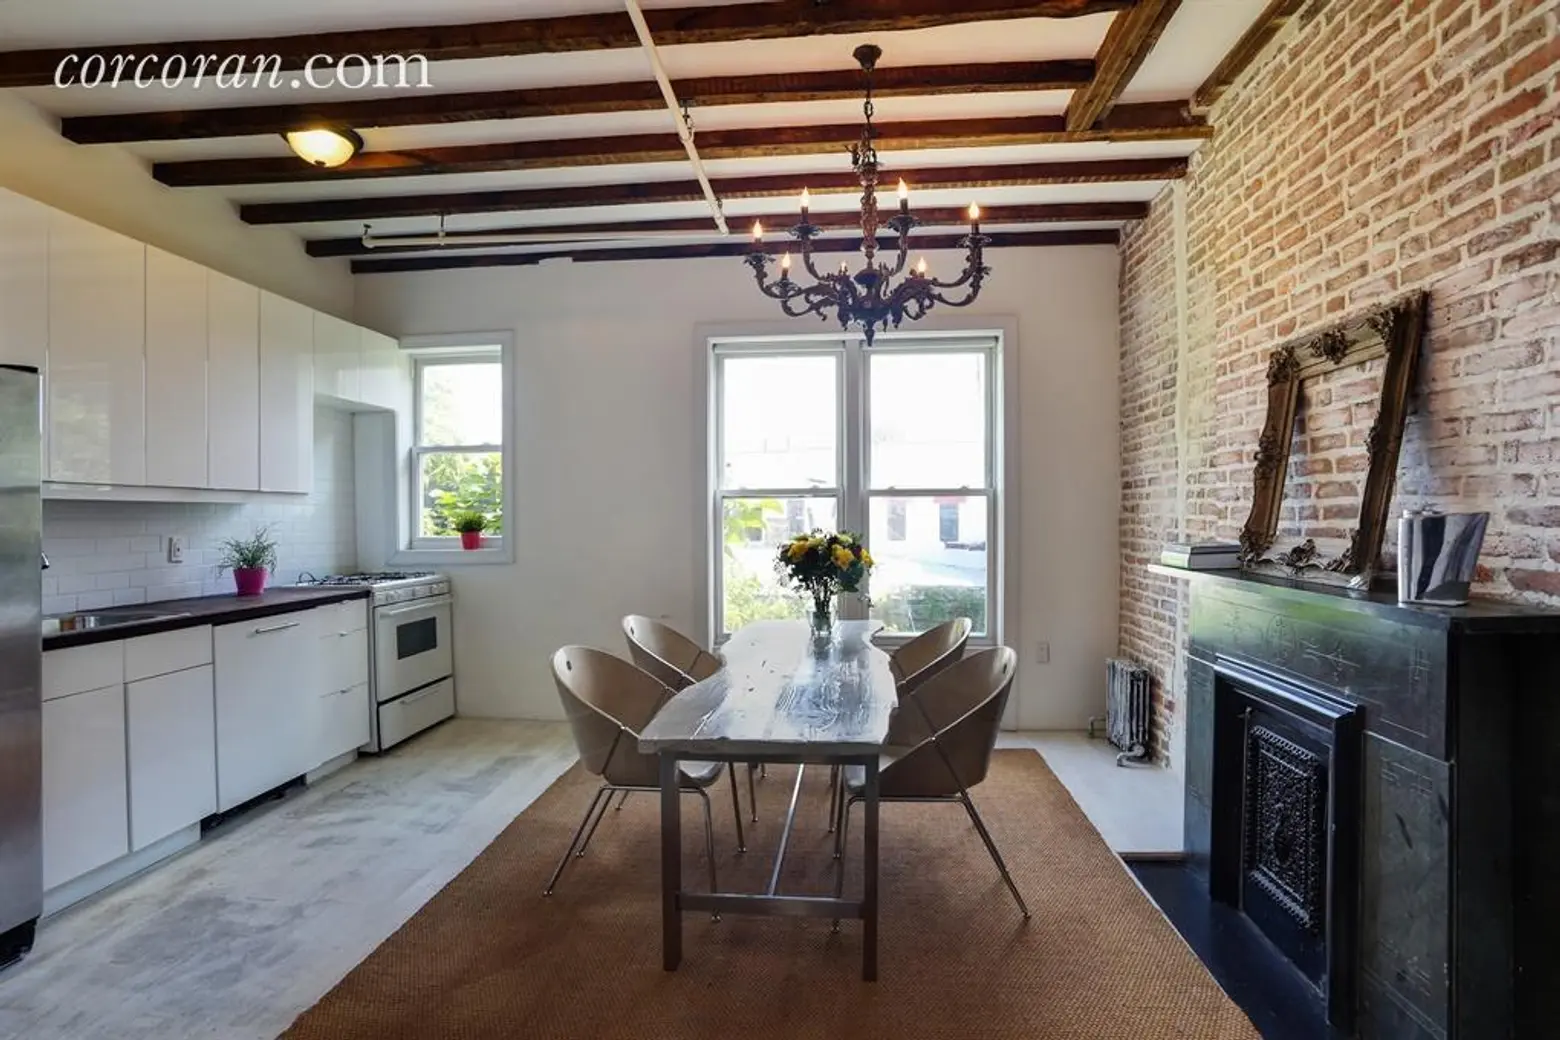 44 Macon Street, Brownstone, Townhouse, Cool Listing, Brooklyn, Brooklyn townhouse for sale